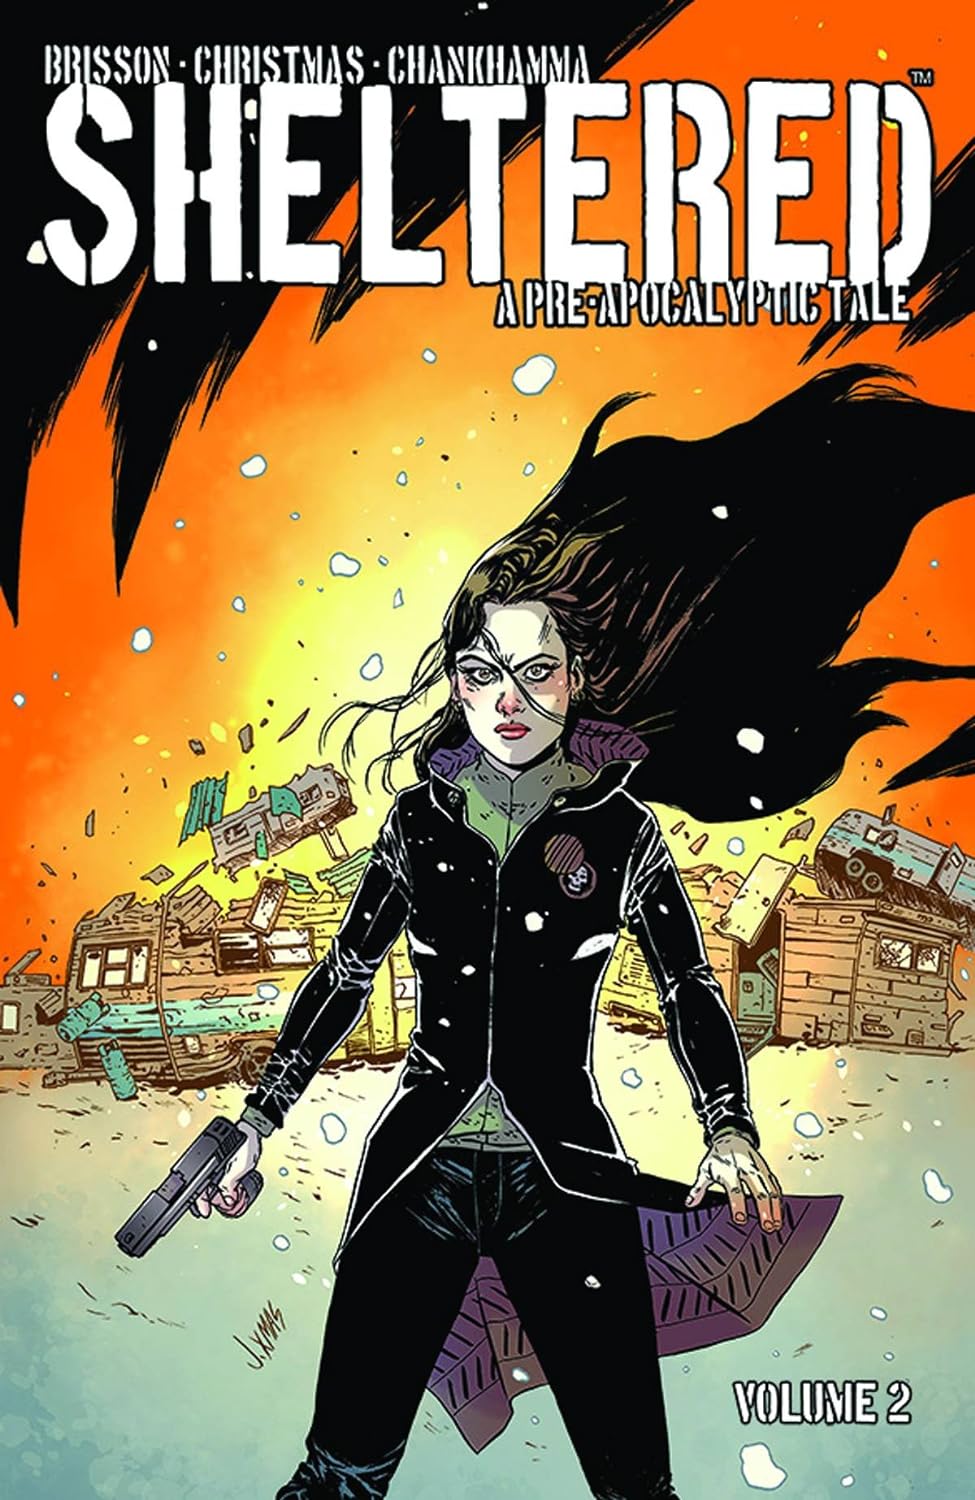 Sheltered: A Pre-Apocalyptic Tale Vol. 2 TP 2014